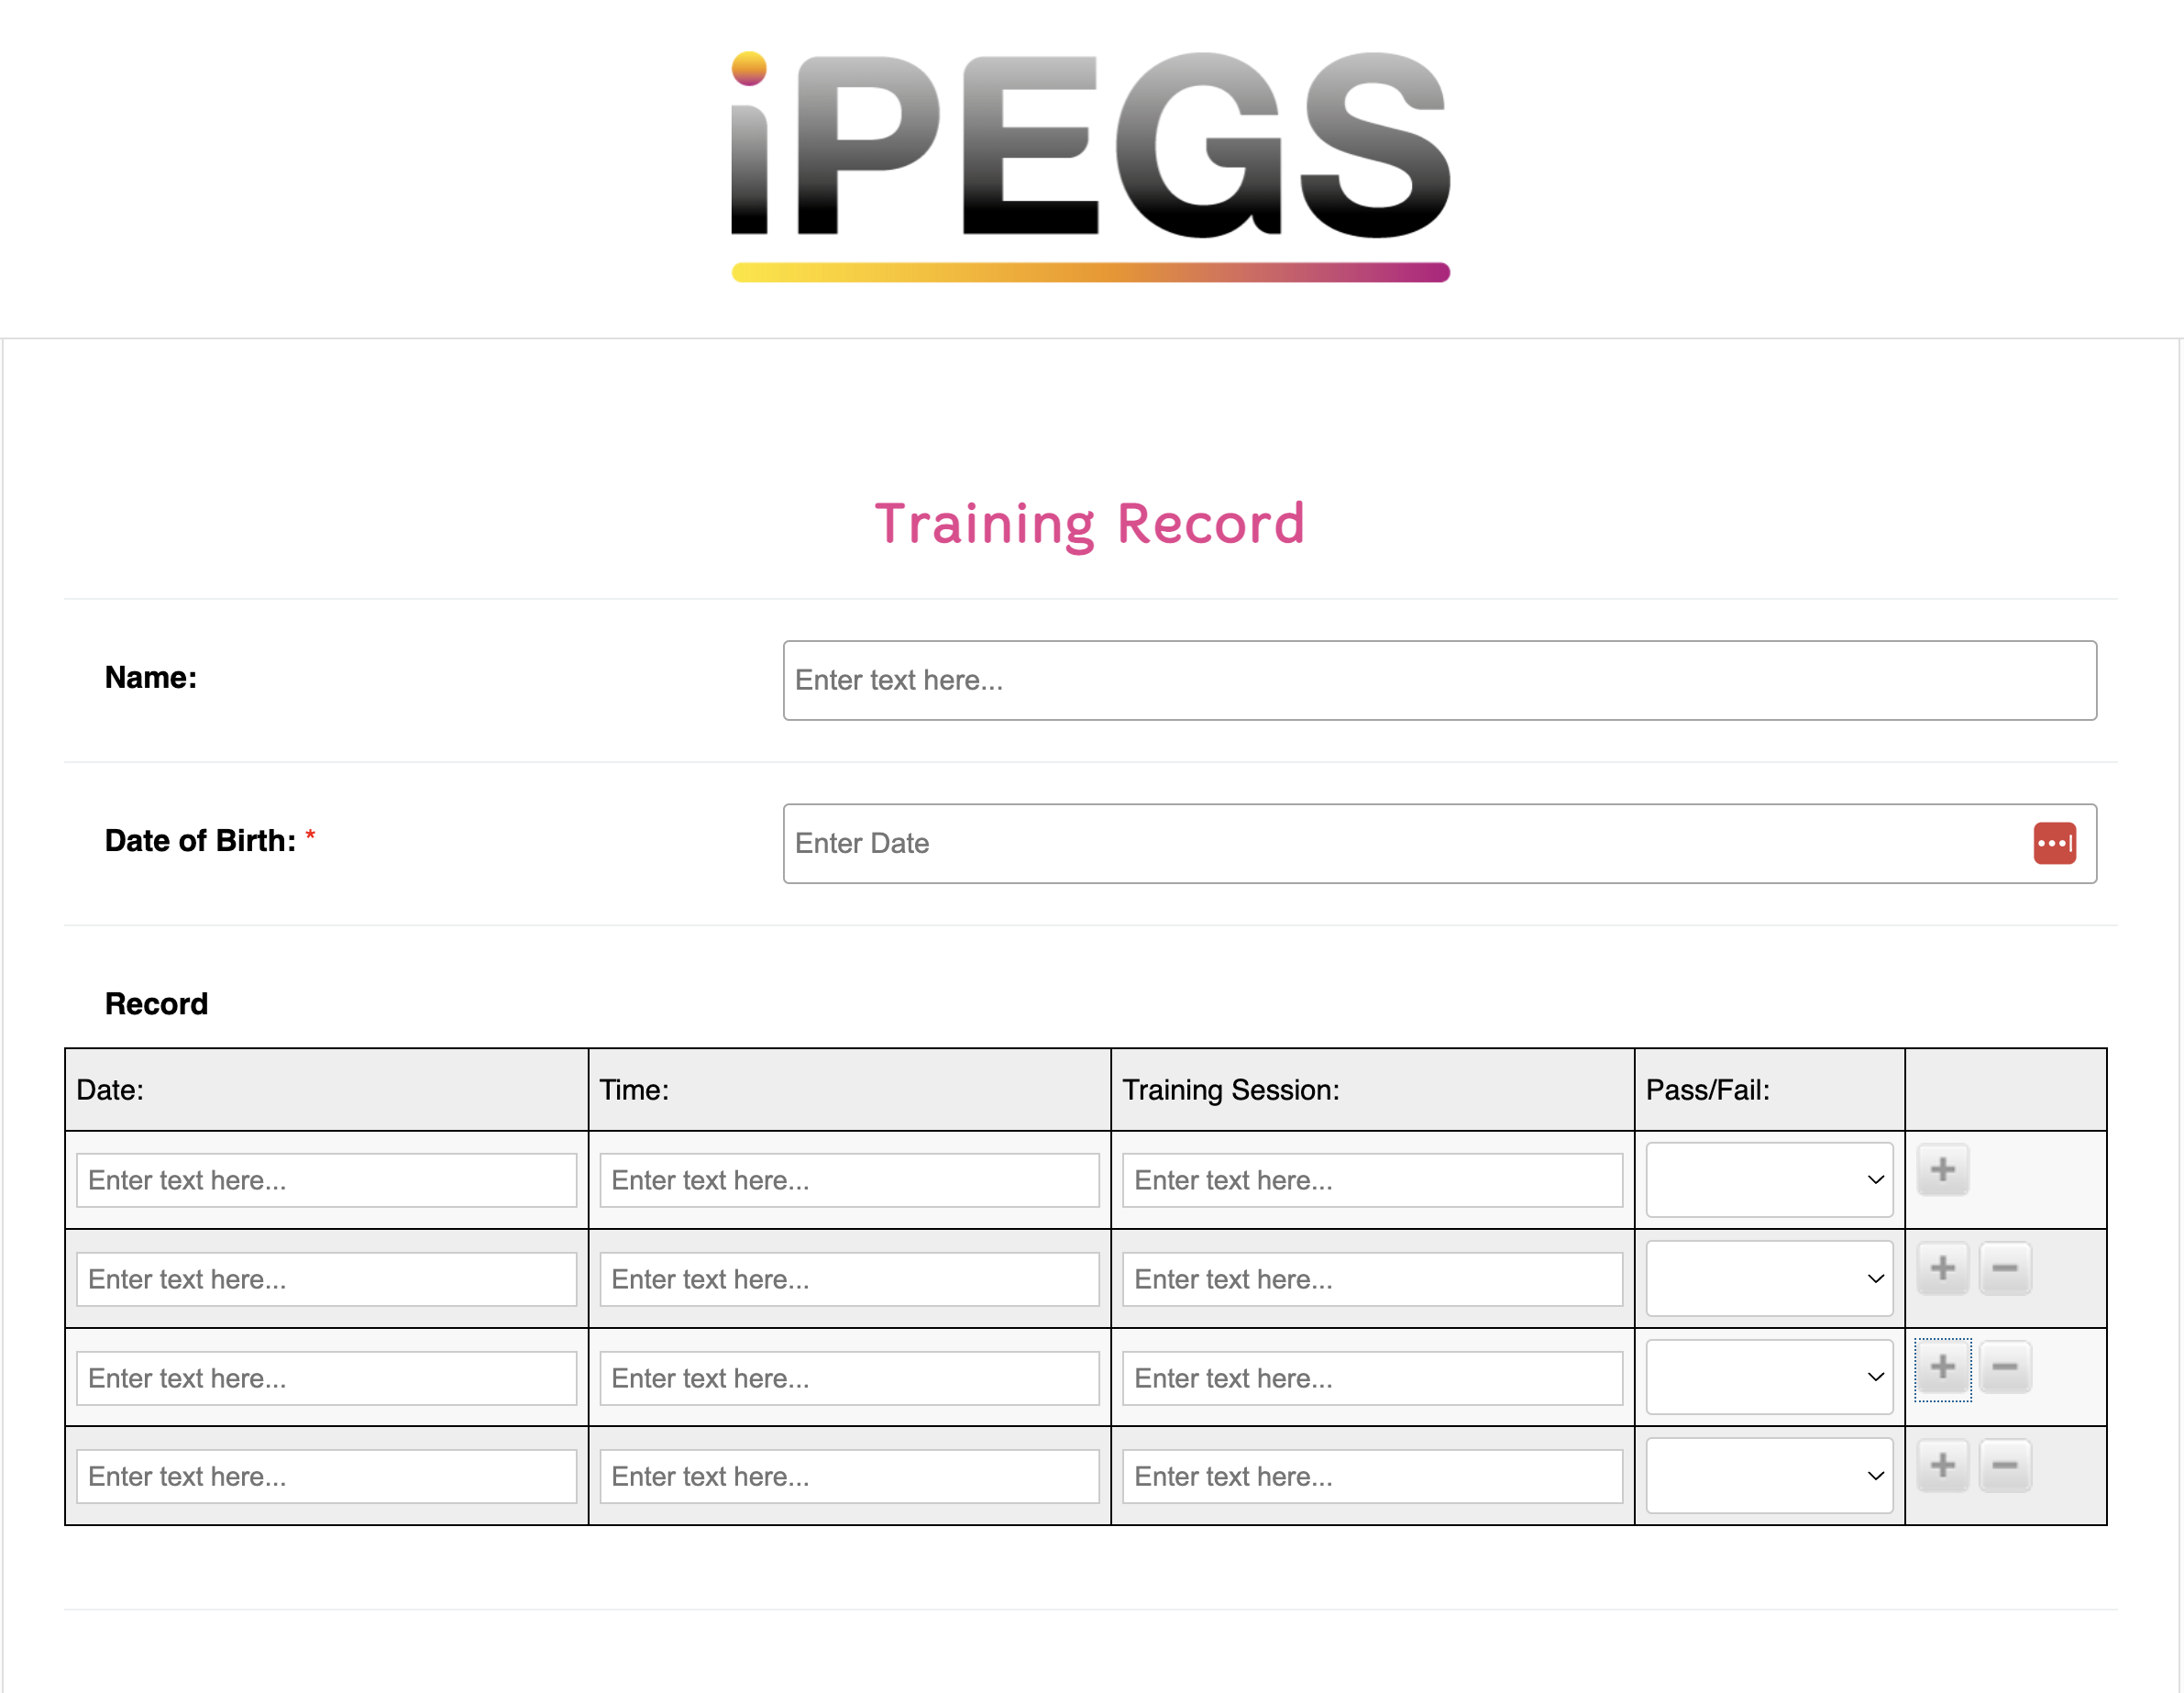 Training and Treatment Records can easily be updated and saved after each session.